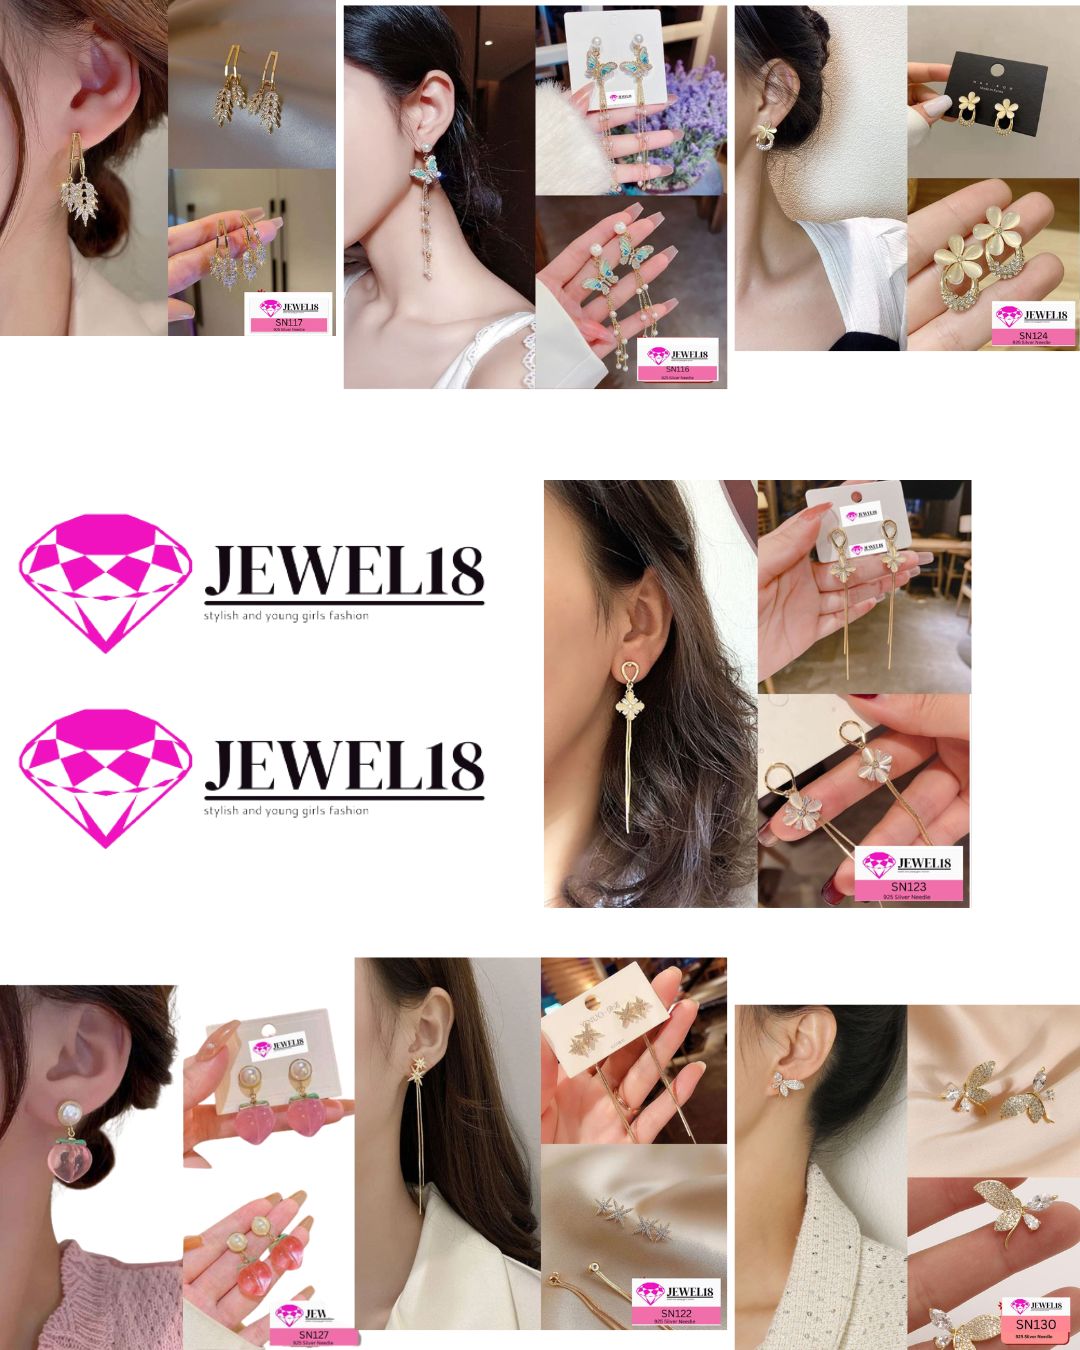 JEWEL18 - FASHION FOR YOUNG GIRLS & WOMEN ONLY